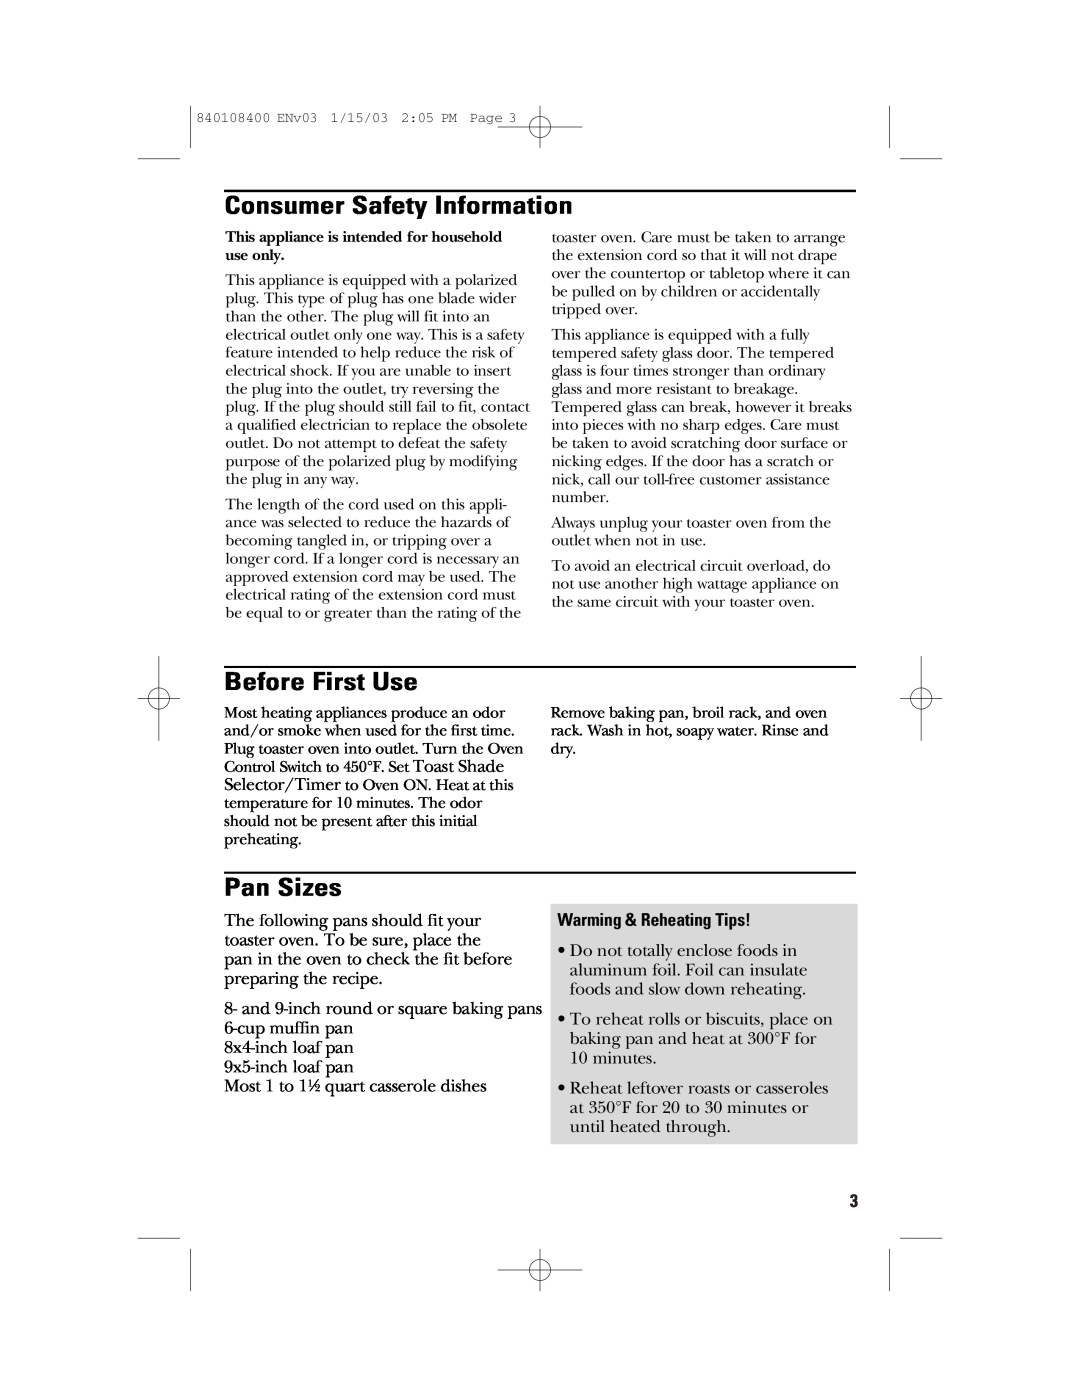 GE 168955, 840108400 manual Consumer Safety Information, Before First Use, Pan Sizes, Warming & Reheating Tips 